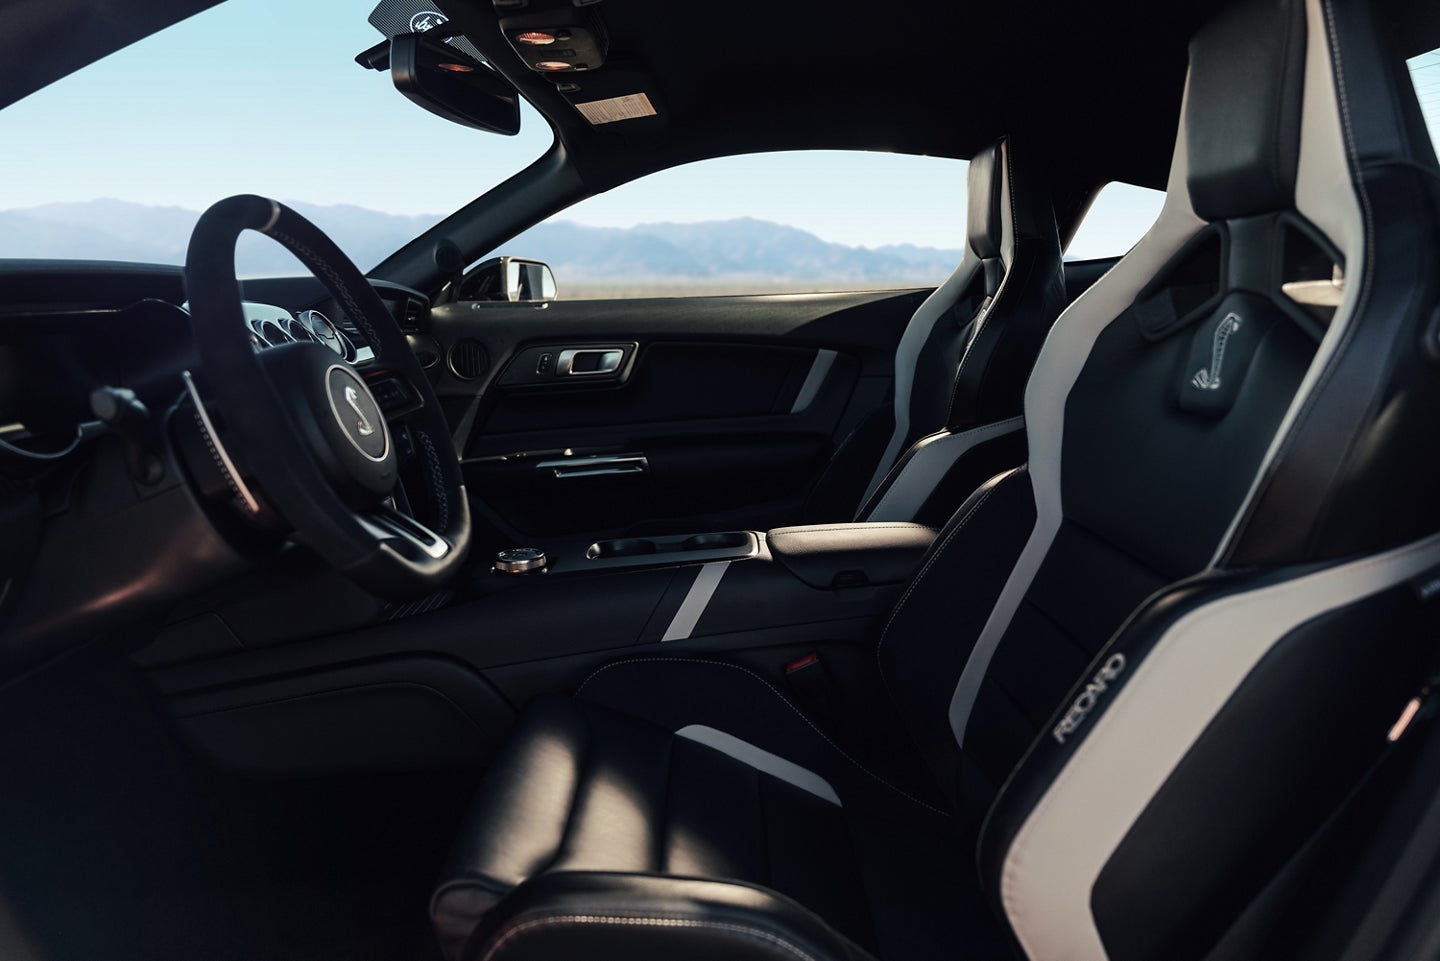 Interior of the 2020 Mustang